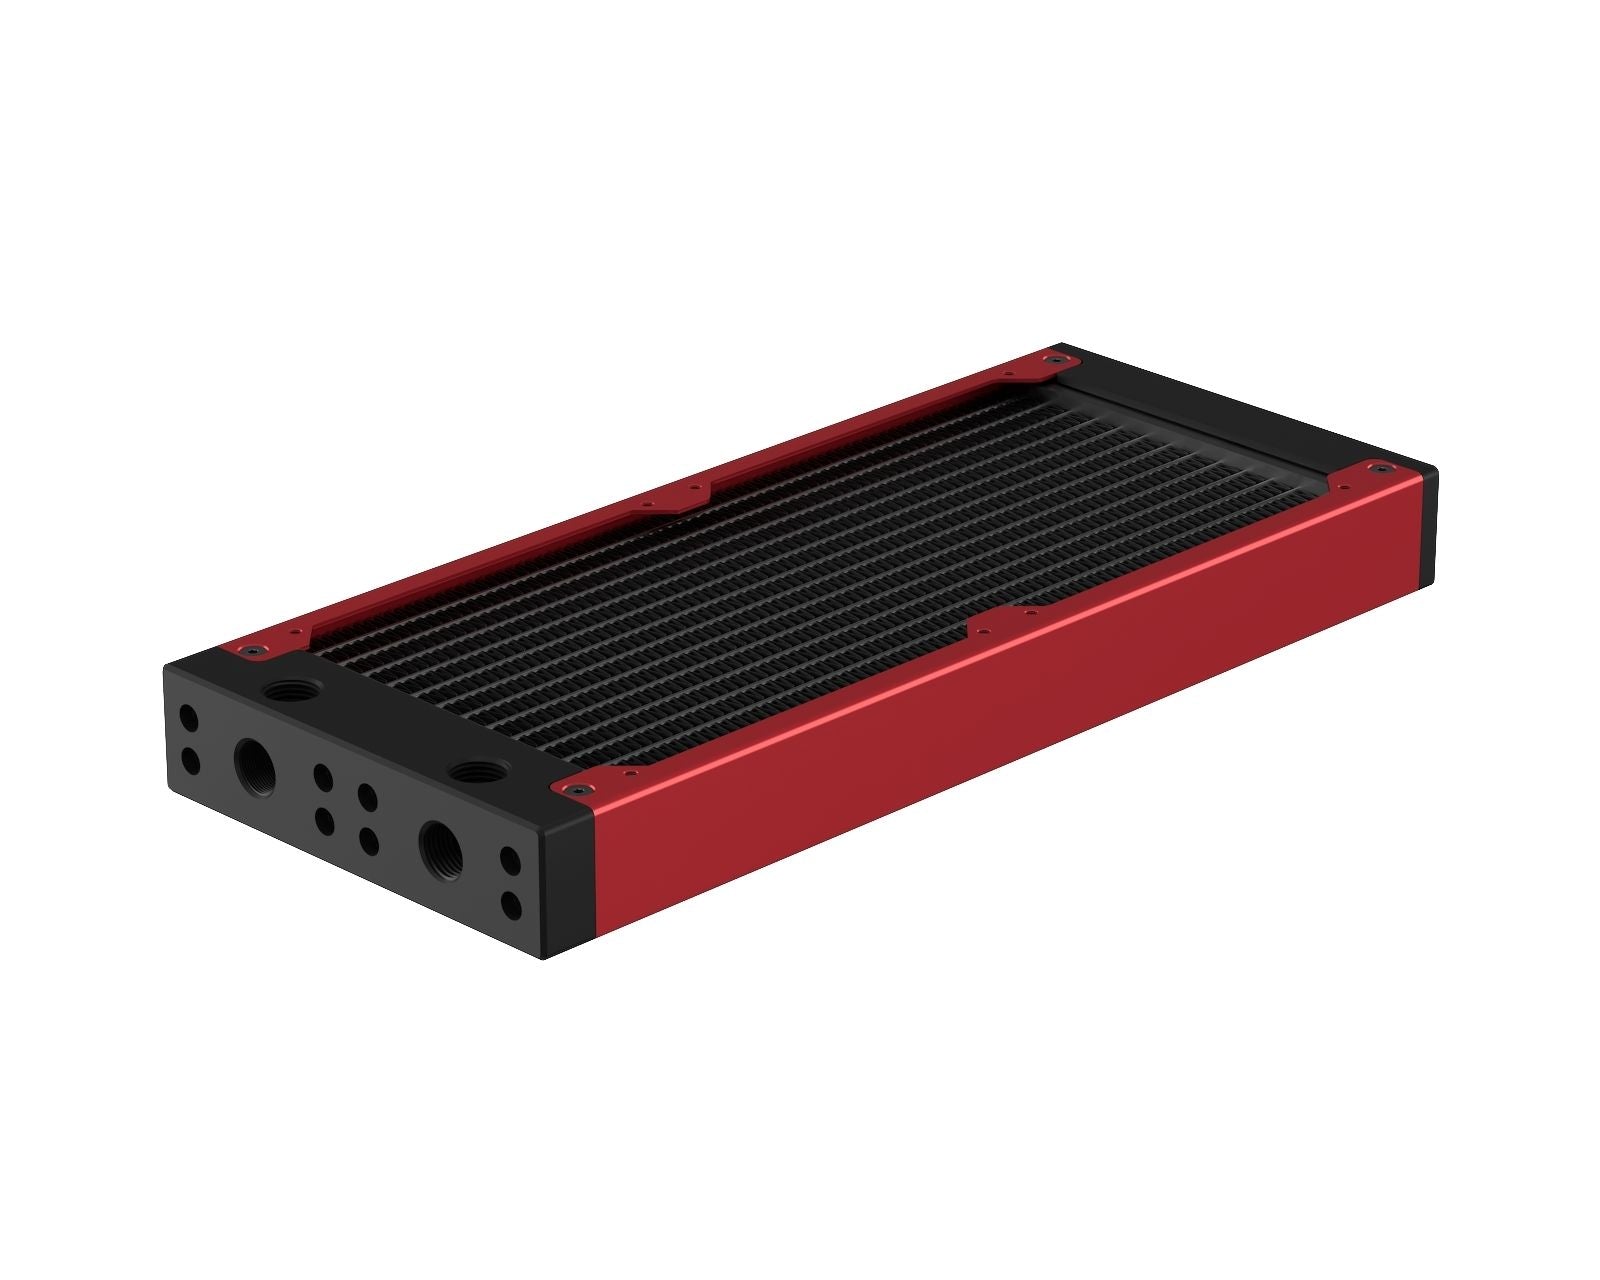 PrimoChill 240SL (30mm) EXIMO Modular Radiator, Black POM, 2x120mm, Dual Fan (R-SL-BK24) Available in 20+ Colors, Assembled in USA and Custom Watercooling Loop Ready - Candy Red